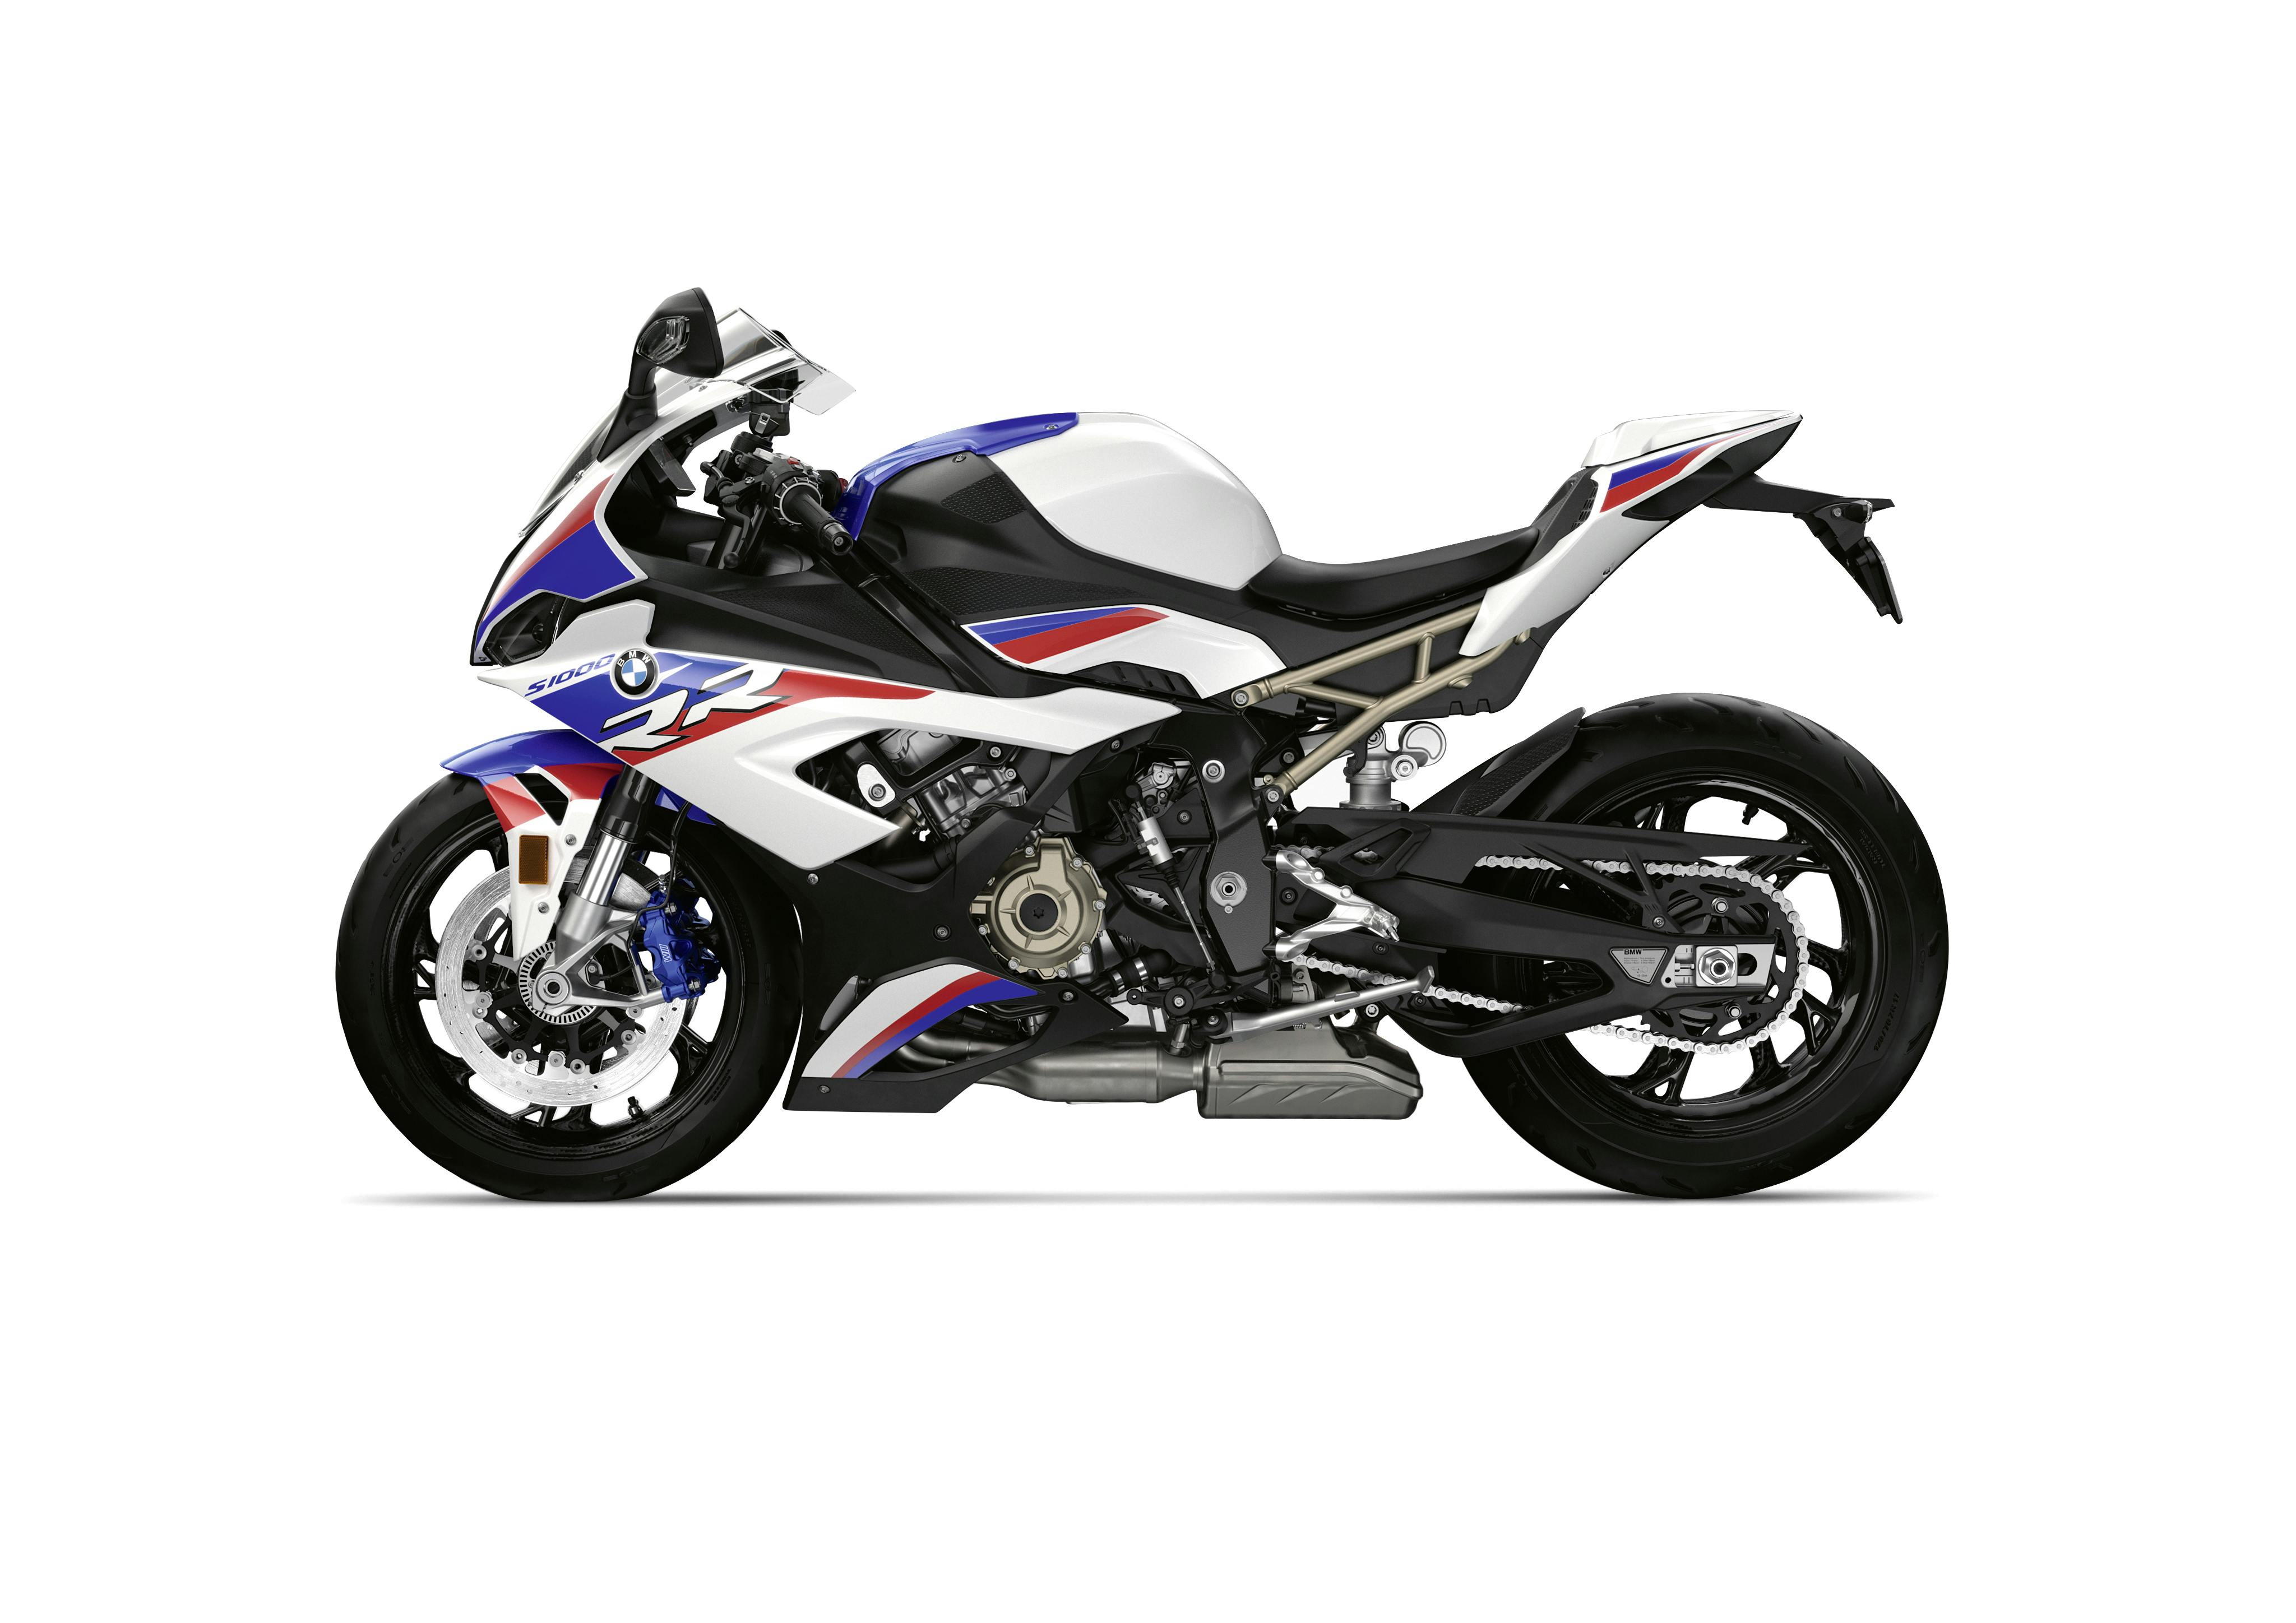 BMW S 1000 RR M Sport in light white, racing blue and red colour